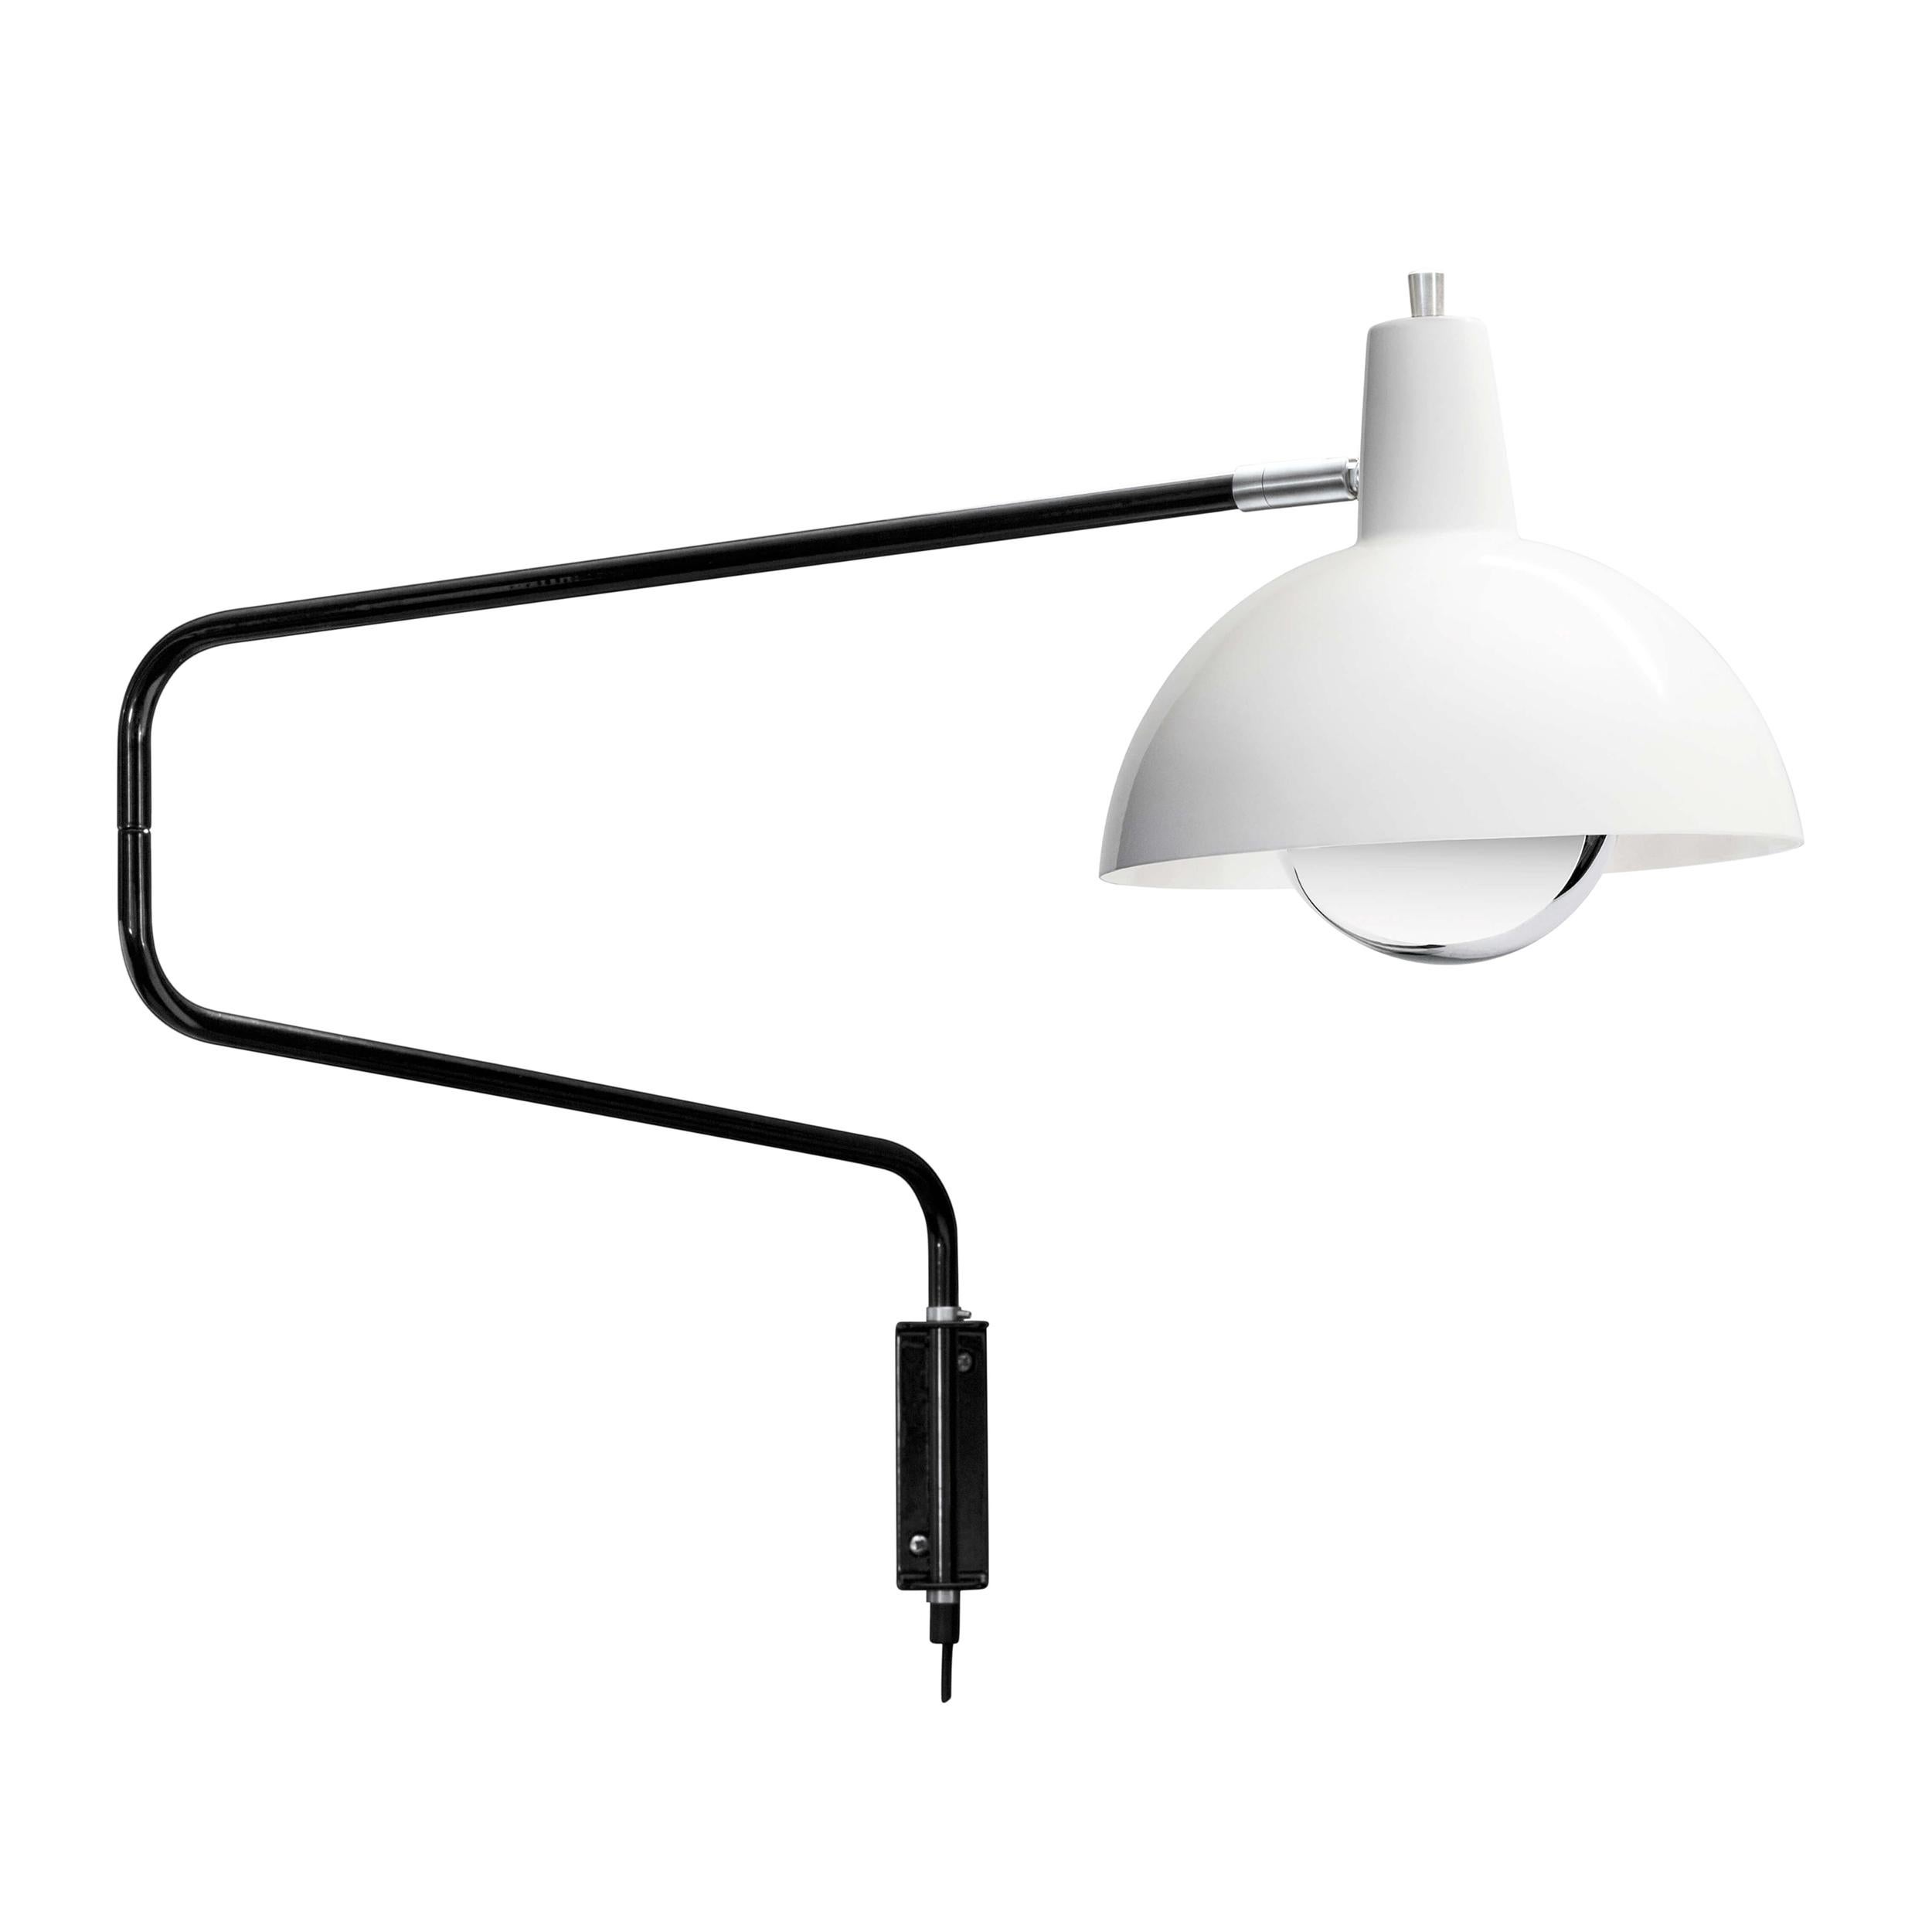 J.J.M. Hoogervorst Model 1702 'Paperclip' wall light for Anvia in black. Hoogervorst's most popular 1950s design, this lamp remains a highly sought after icon of Dutch modernism. The 'elbow' arm when folded measures 27.5 in. wide, but can be